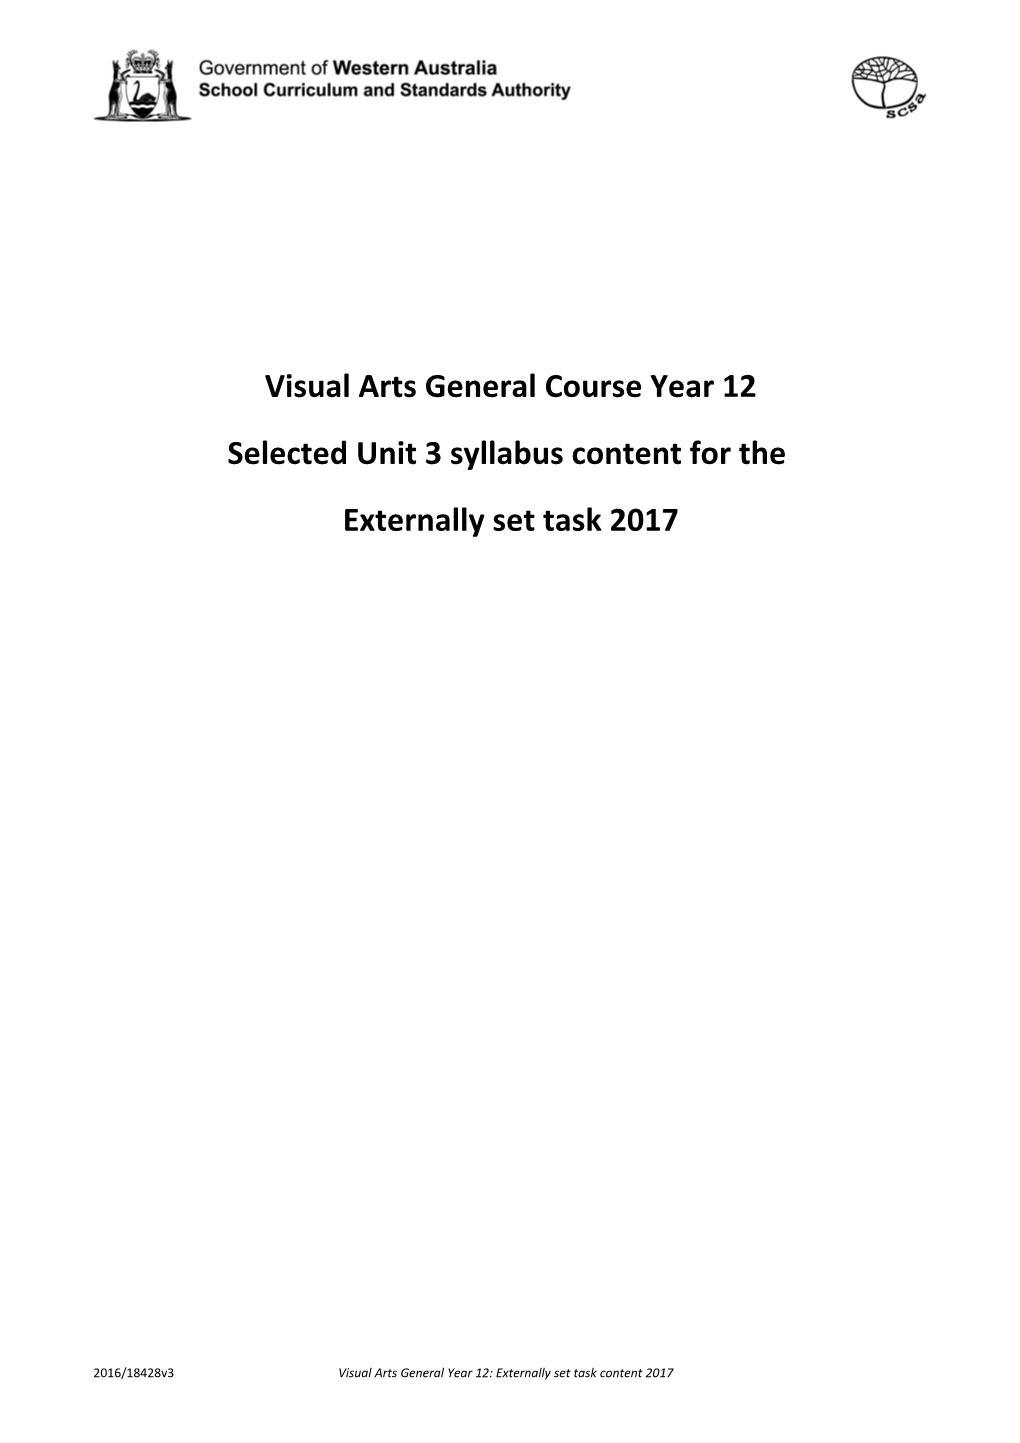 Visual Arts General Course Year 12